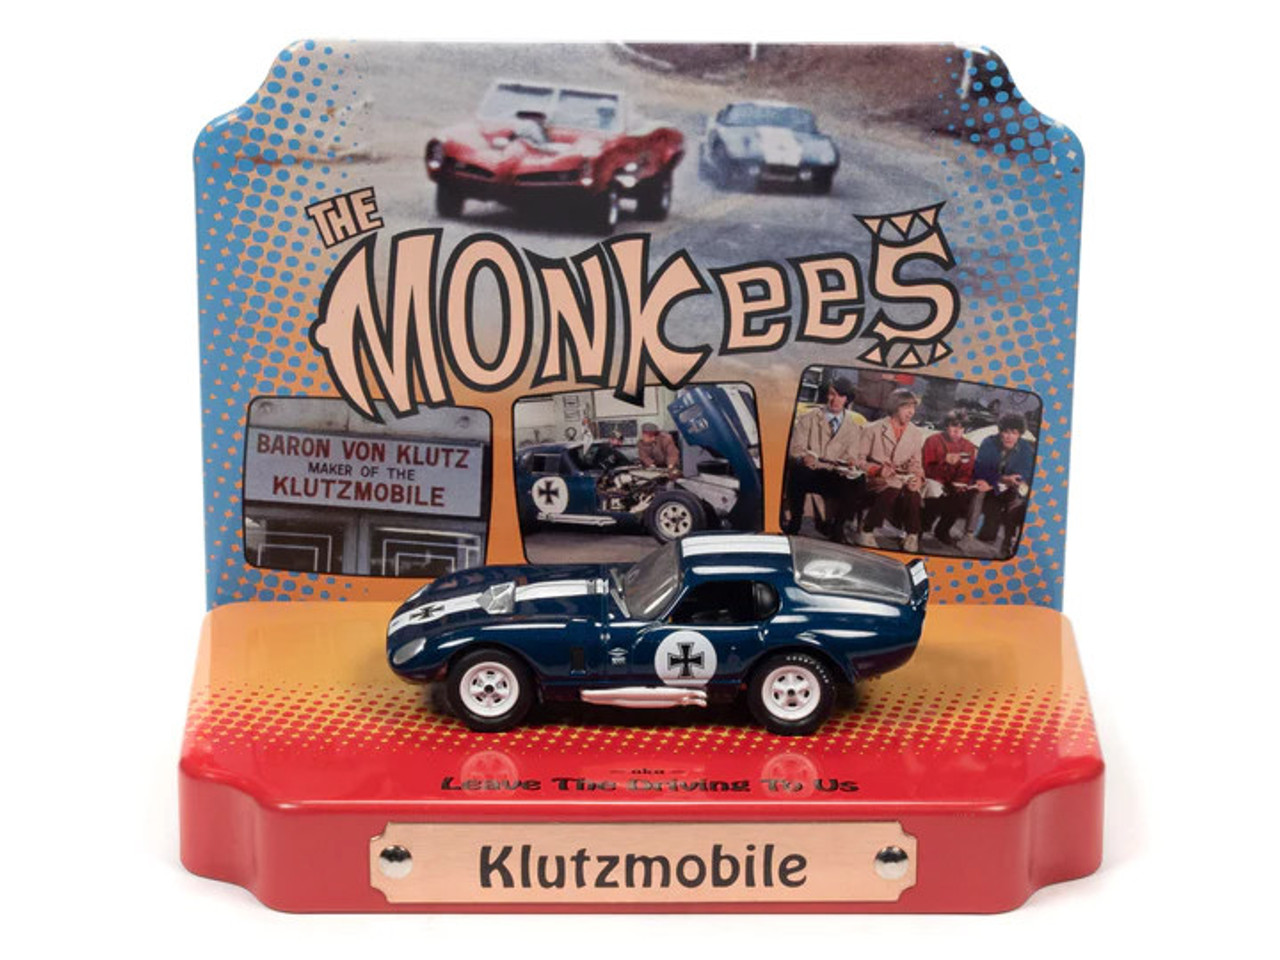 Ford Mustanf Shelby Cobra Daytona "Klutzmobile" Blue Metallic with White Stripes "The Monkees" with Collectible Tin Display "Silver Screen Machines" Series 1/64 Diecast Model Car by Johnny Lightning